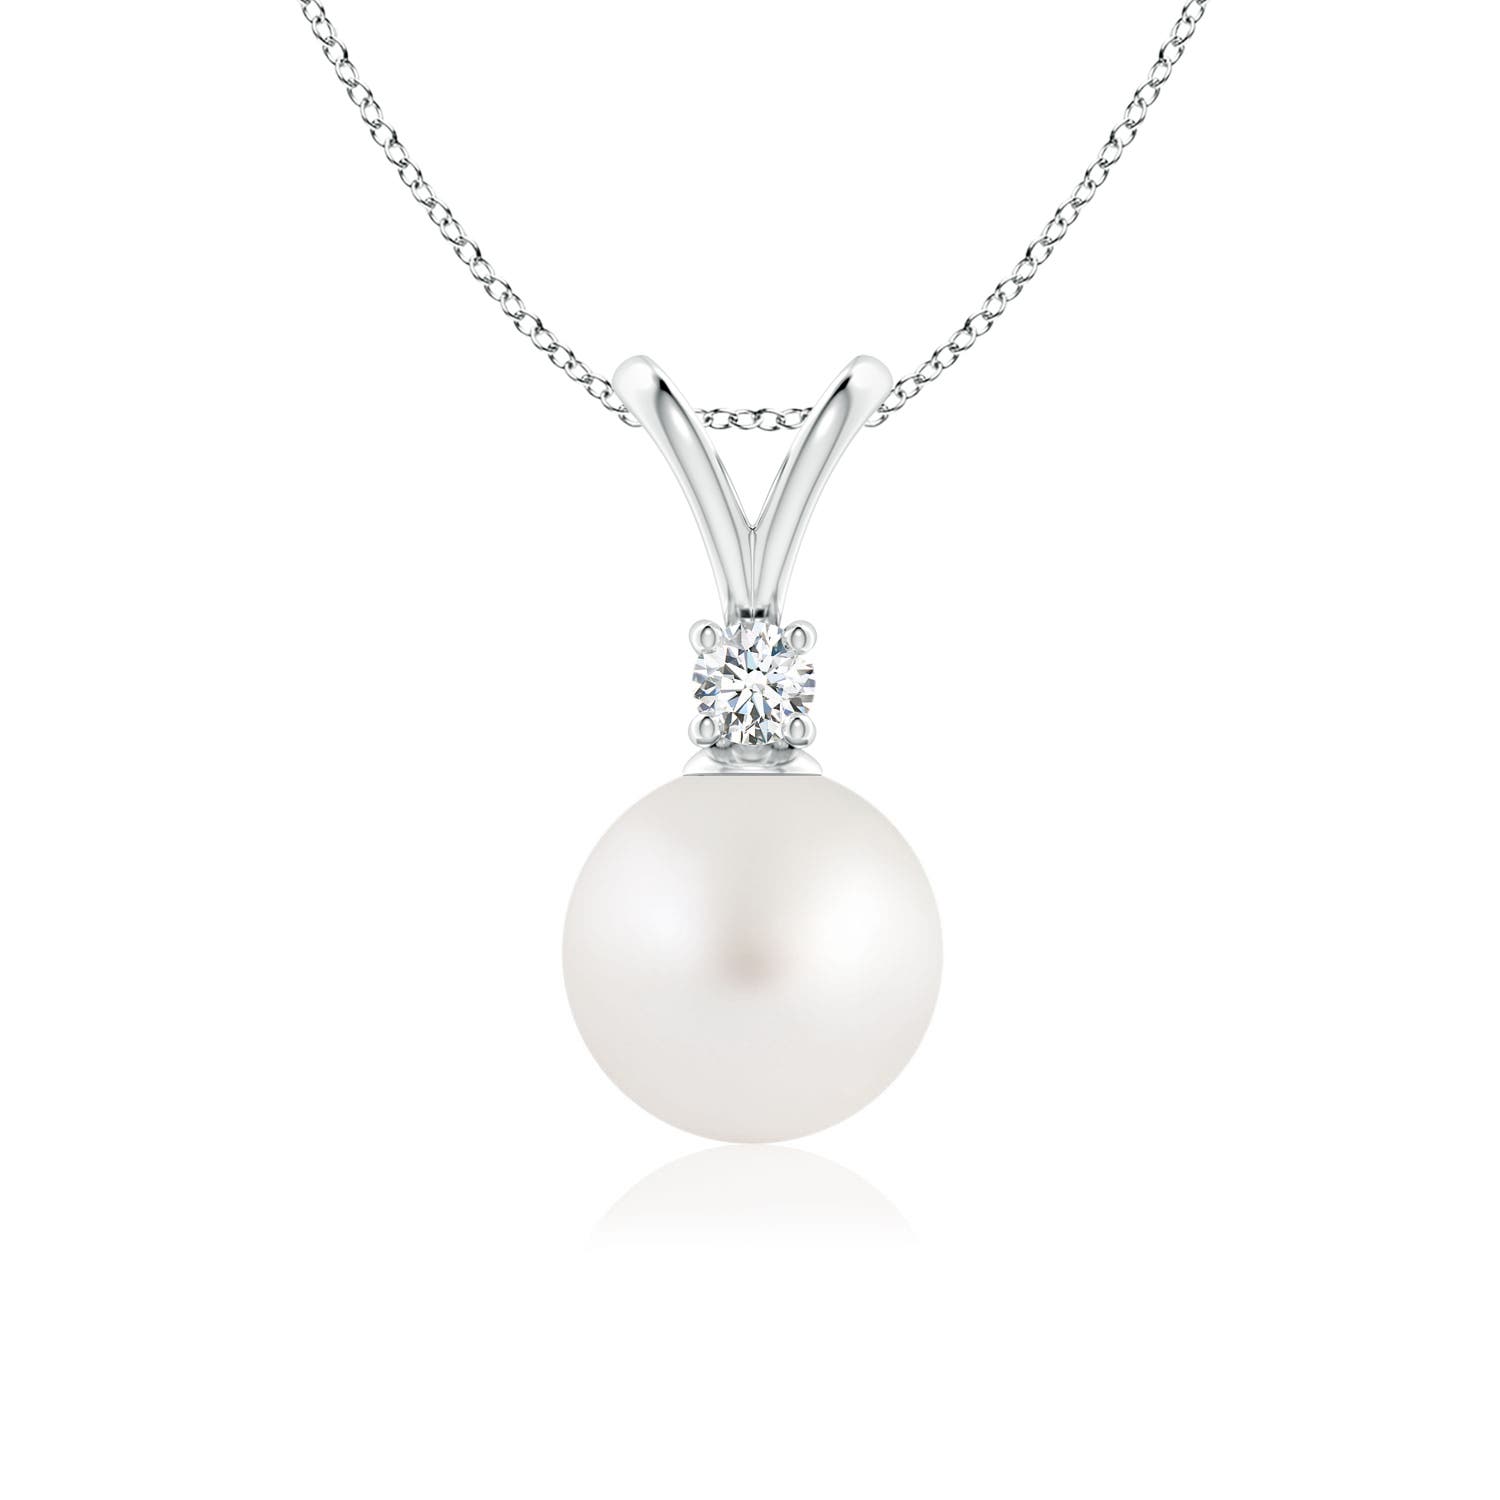 AA - South Sea Cultured Pearl / 3.77 CT / 14 KT White Gold